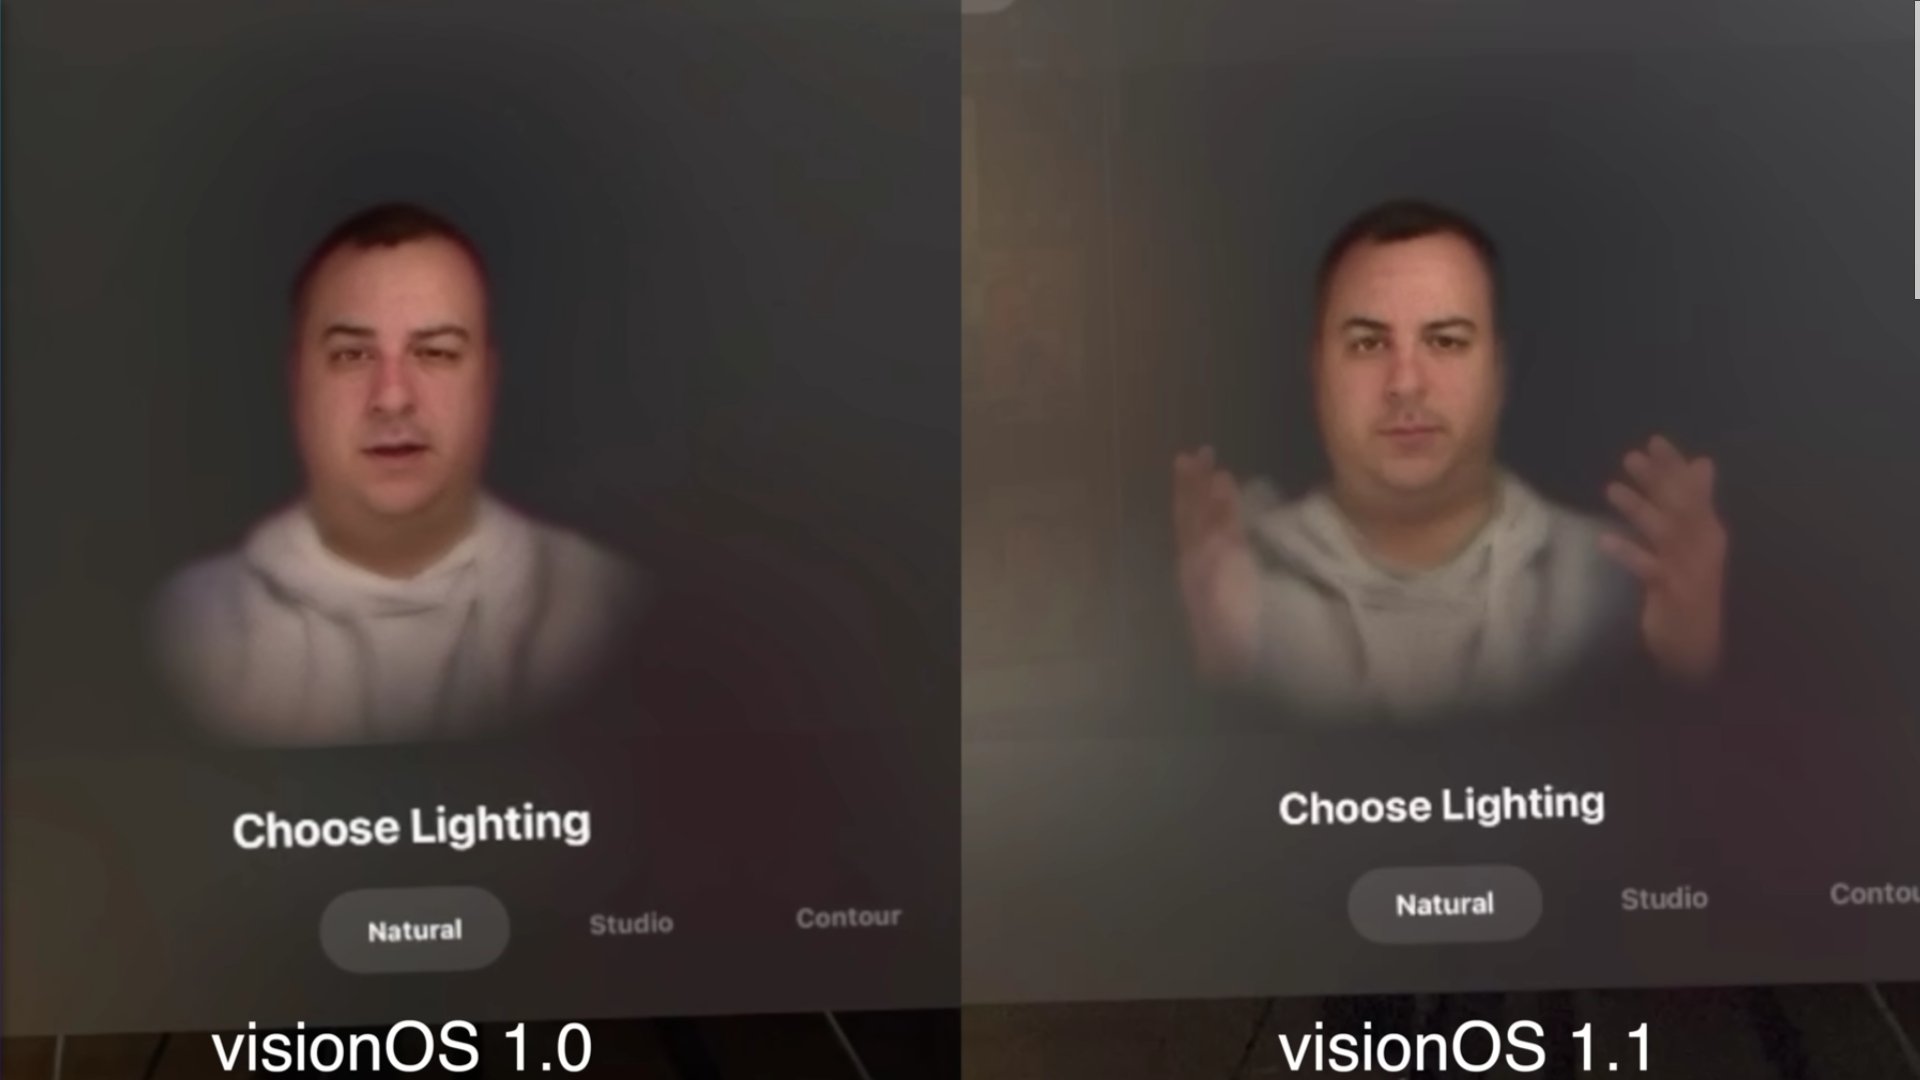 Avatar vision pro before after visionOS 1.1 update 